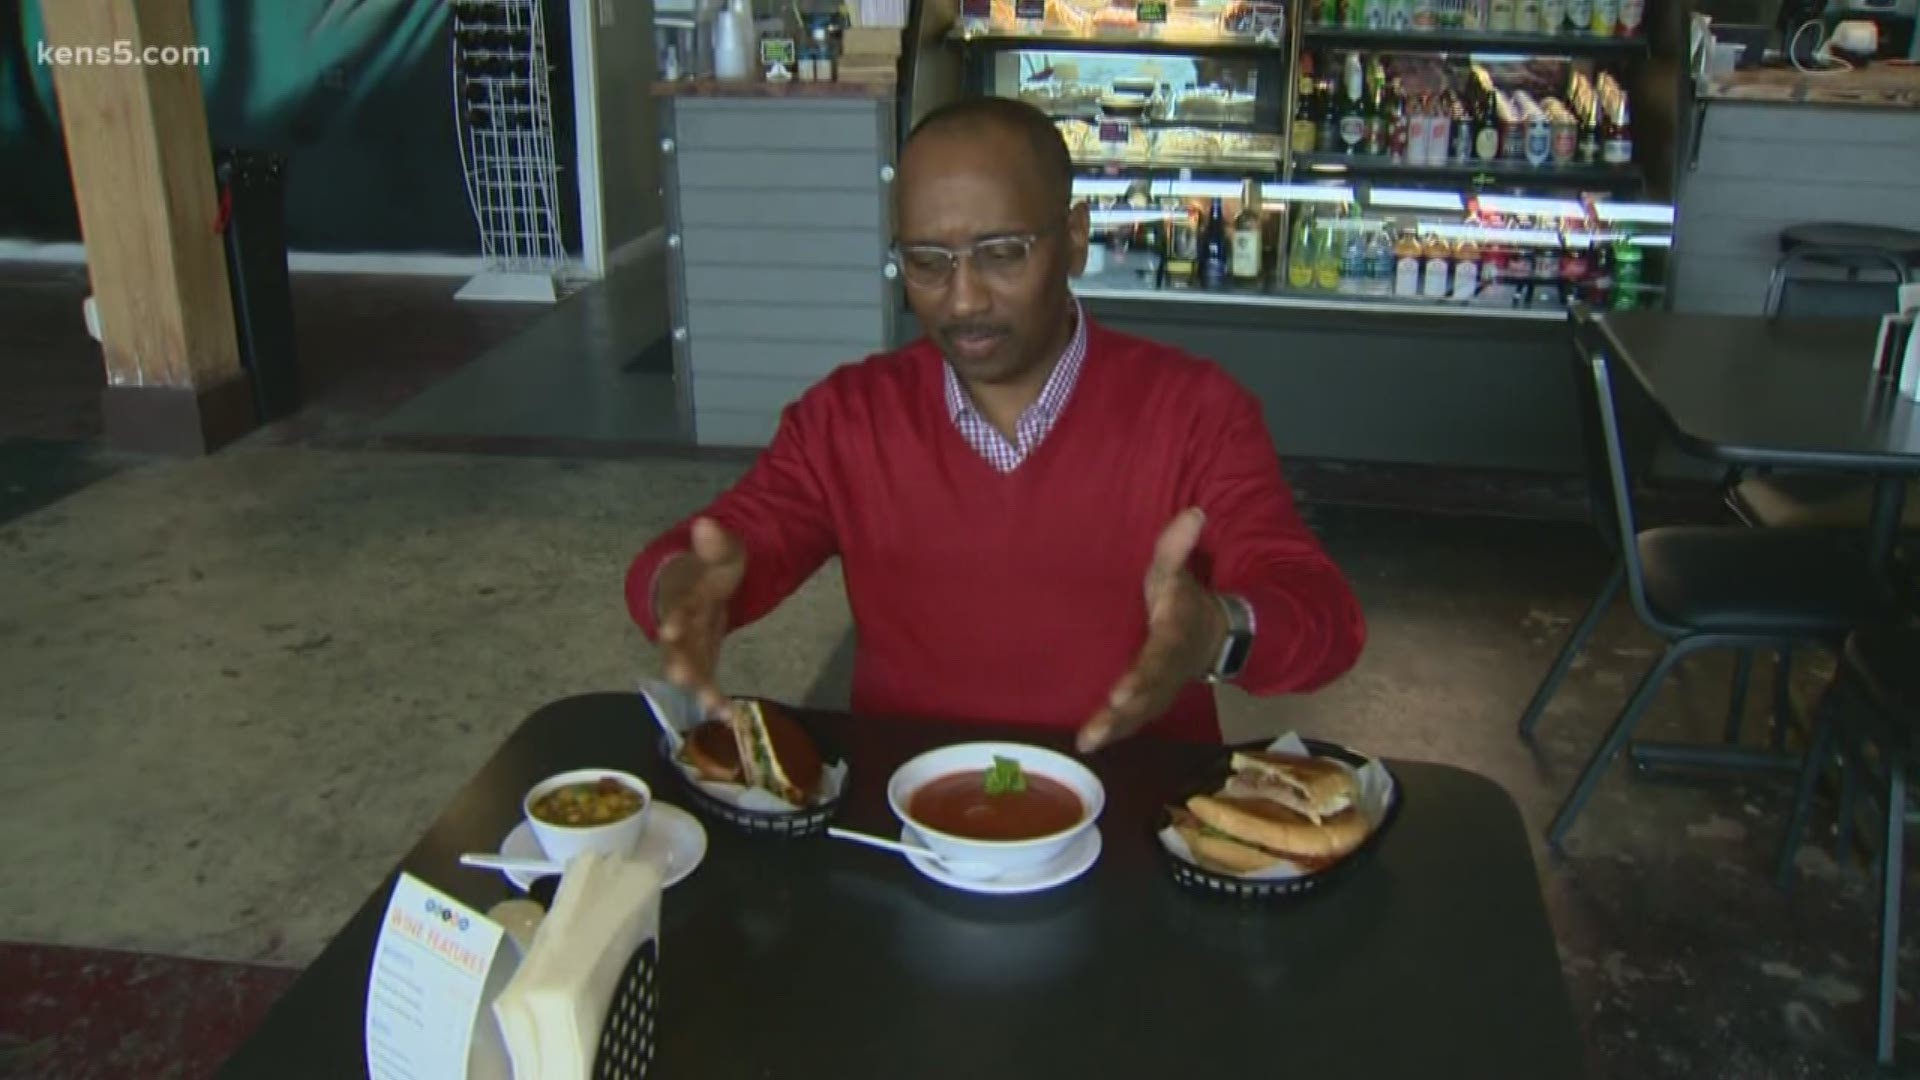 Marvin Hurst has the story behind soup and sandwich place, Alida Cafe